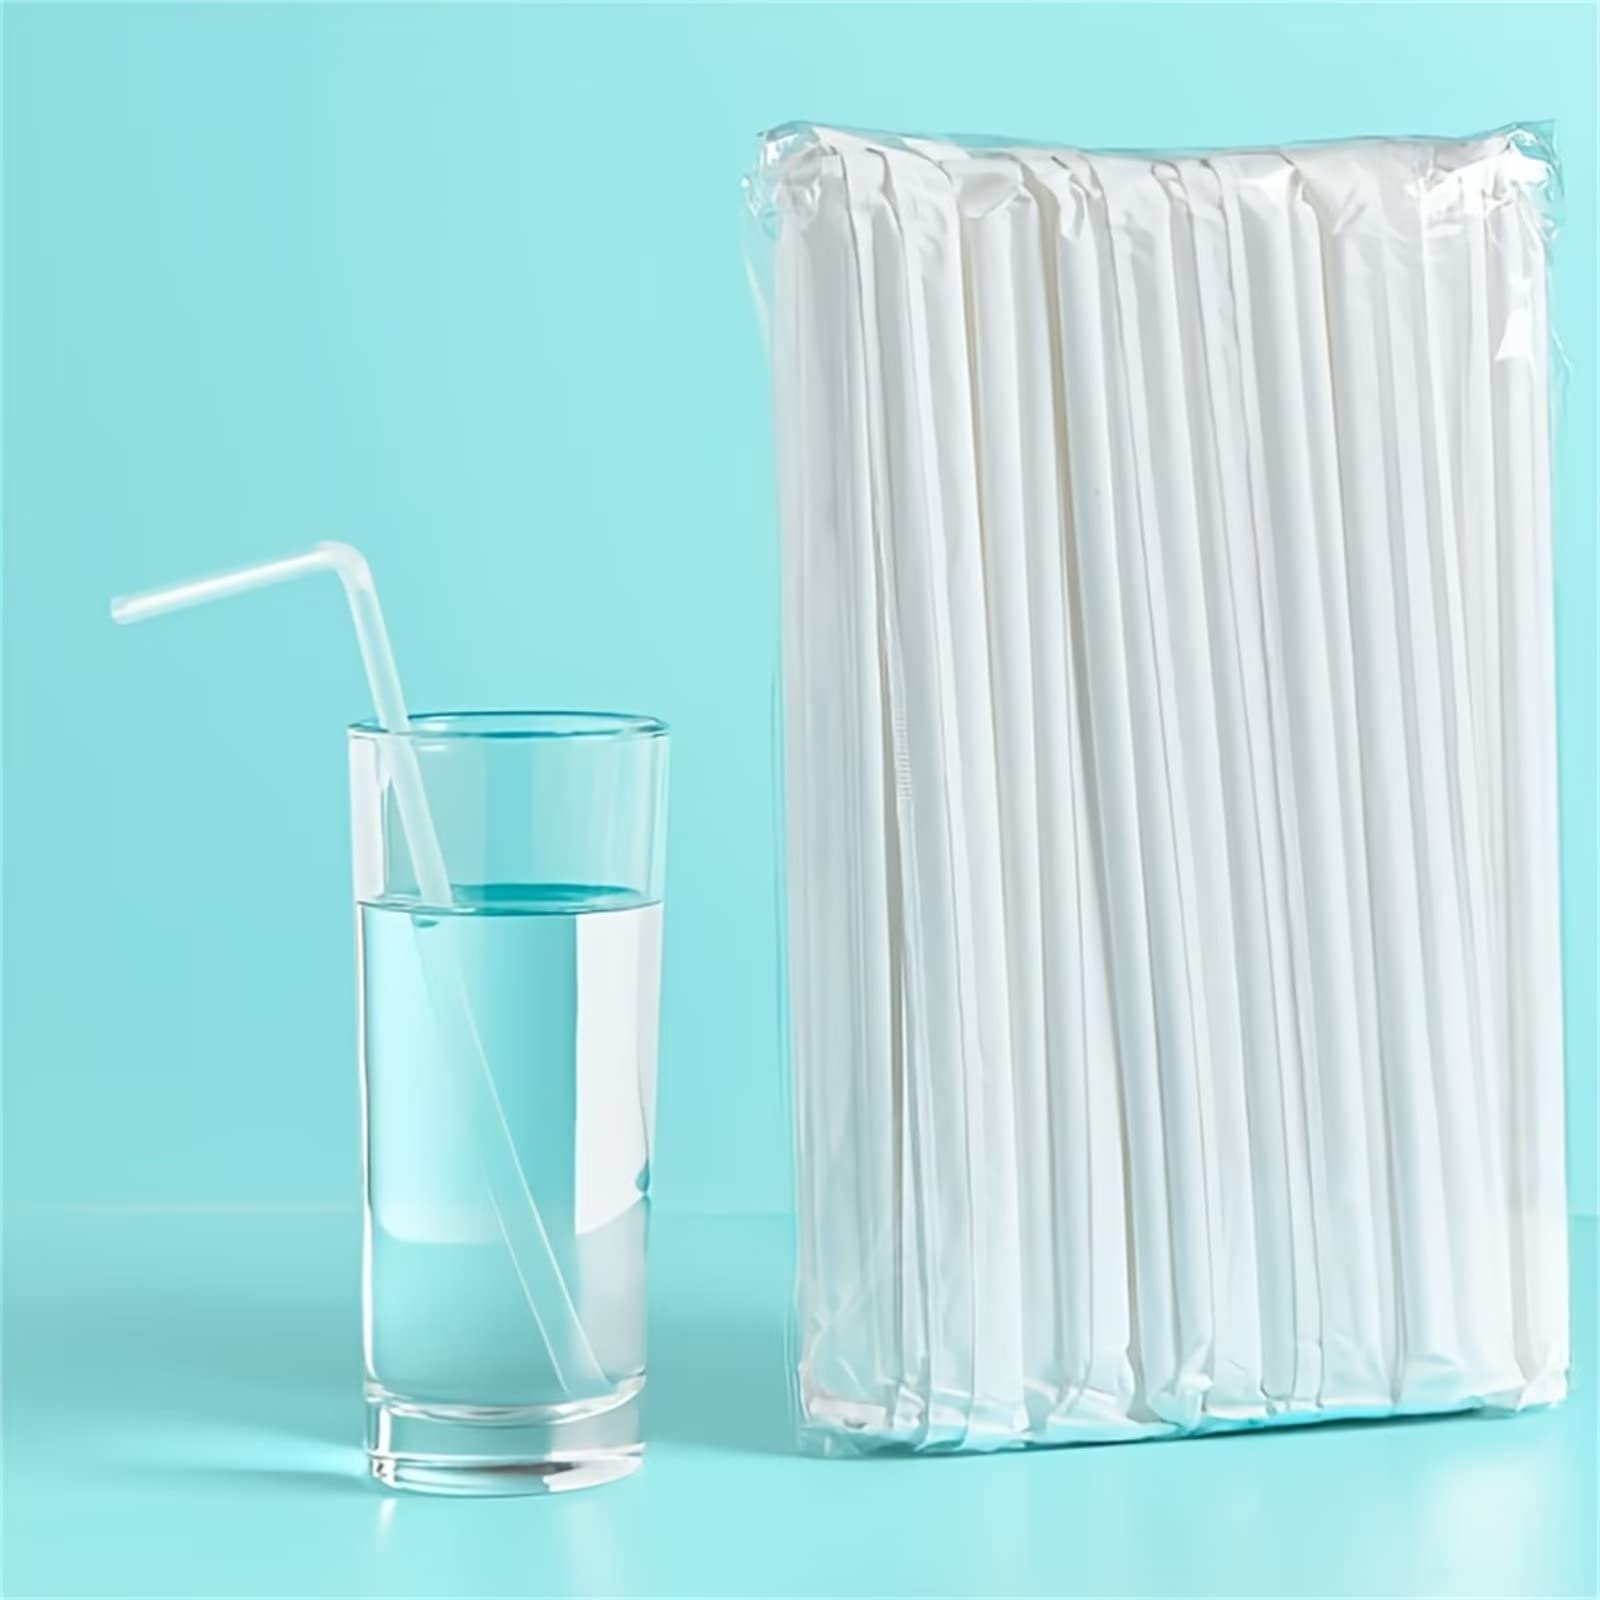 Typutomi 100pcs Clear Plastic Straws Individually Wrapped Disposable Bendy Straw Flexible Drinking Straws for Juice, Milk, Tea, Cocktails, Parties, Daily use(8.3 Inch)